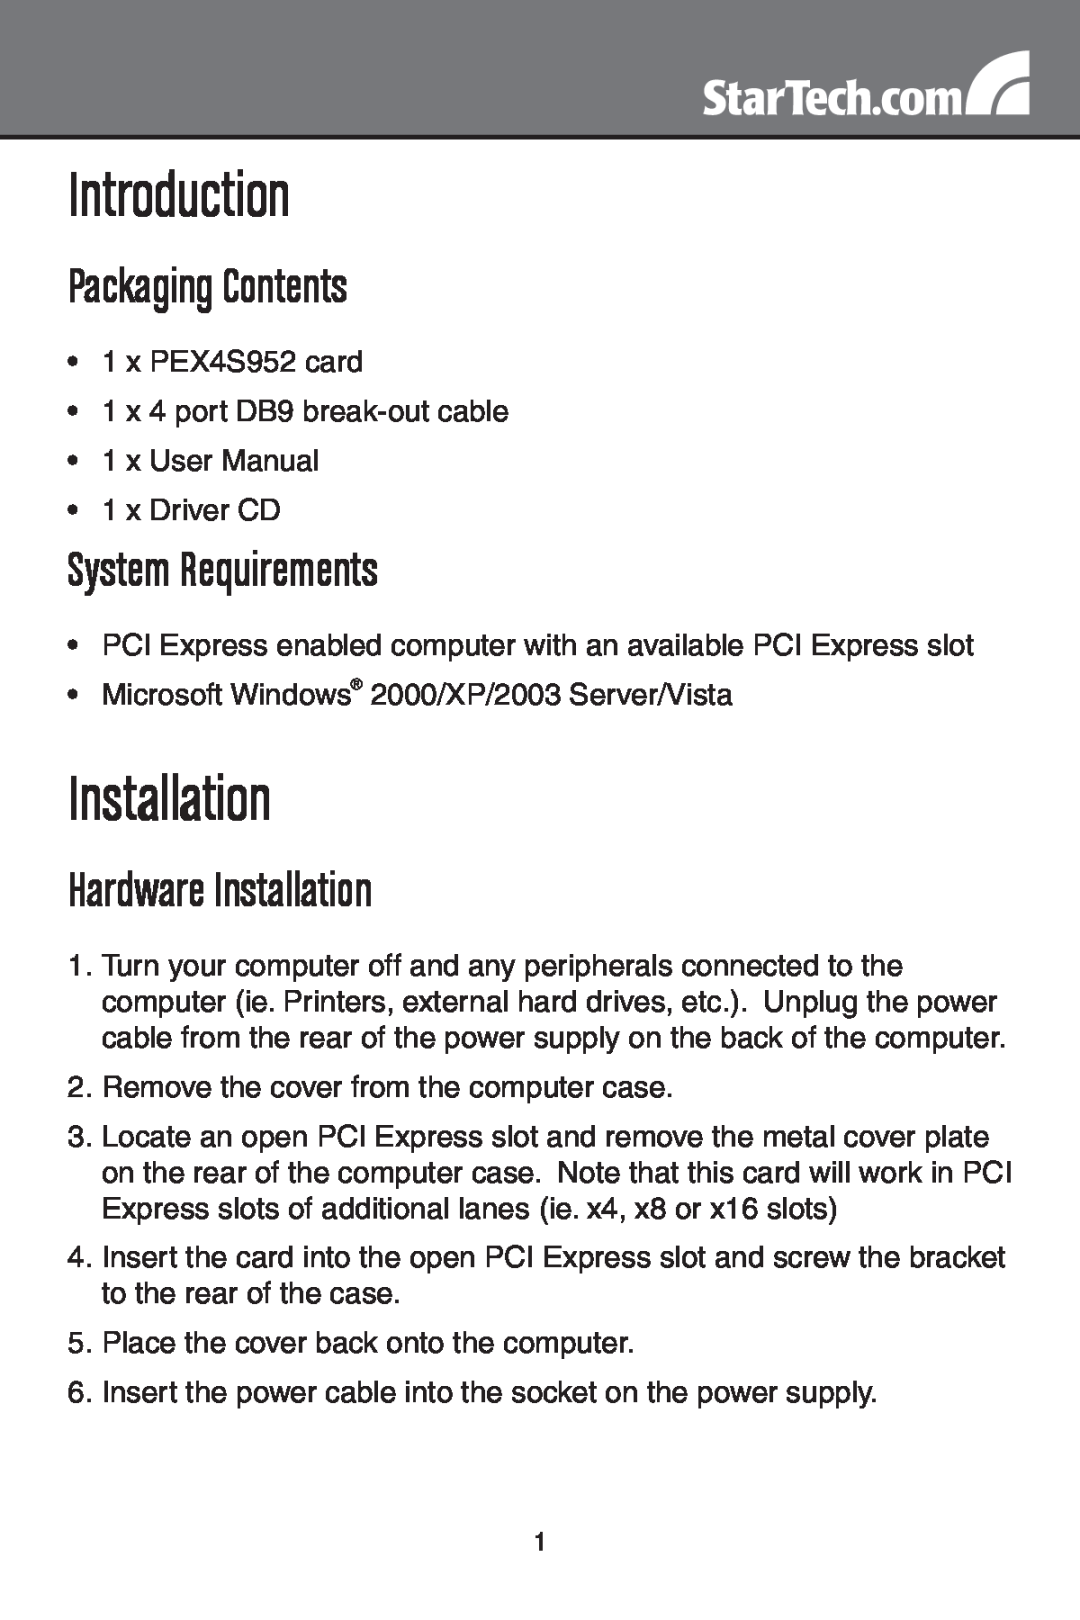 StarTech.com PEX4S952 instruction manual Introduction, Packaging Contents, System Requirements, Hardware Installation 